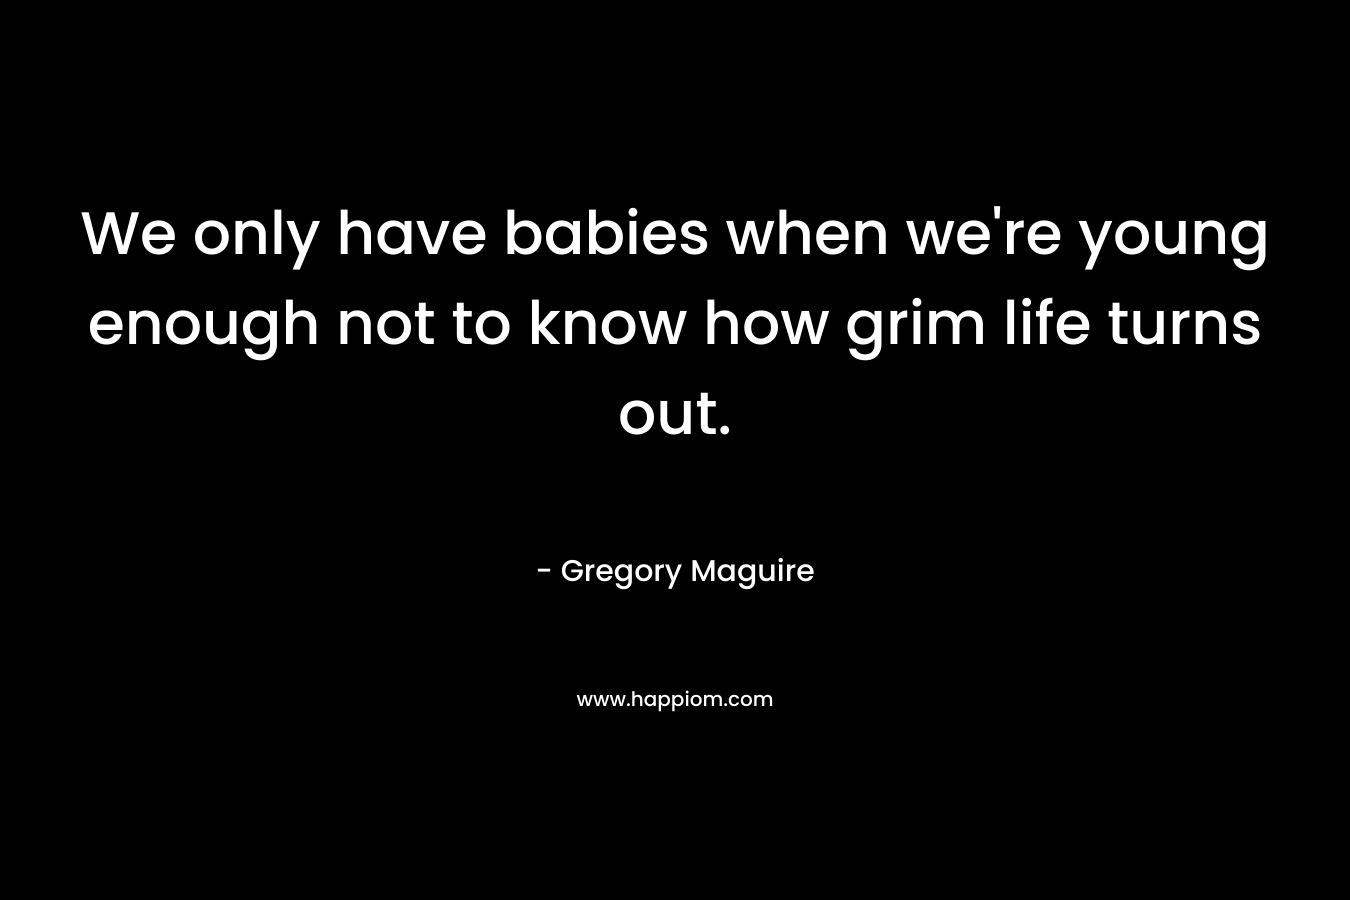 We only have babies when we're young enough not to know how grim life turns out.